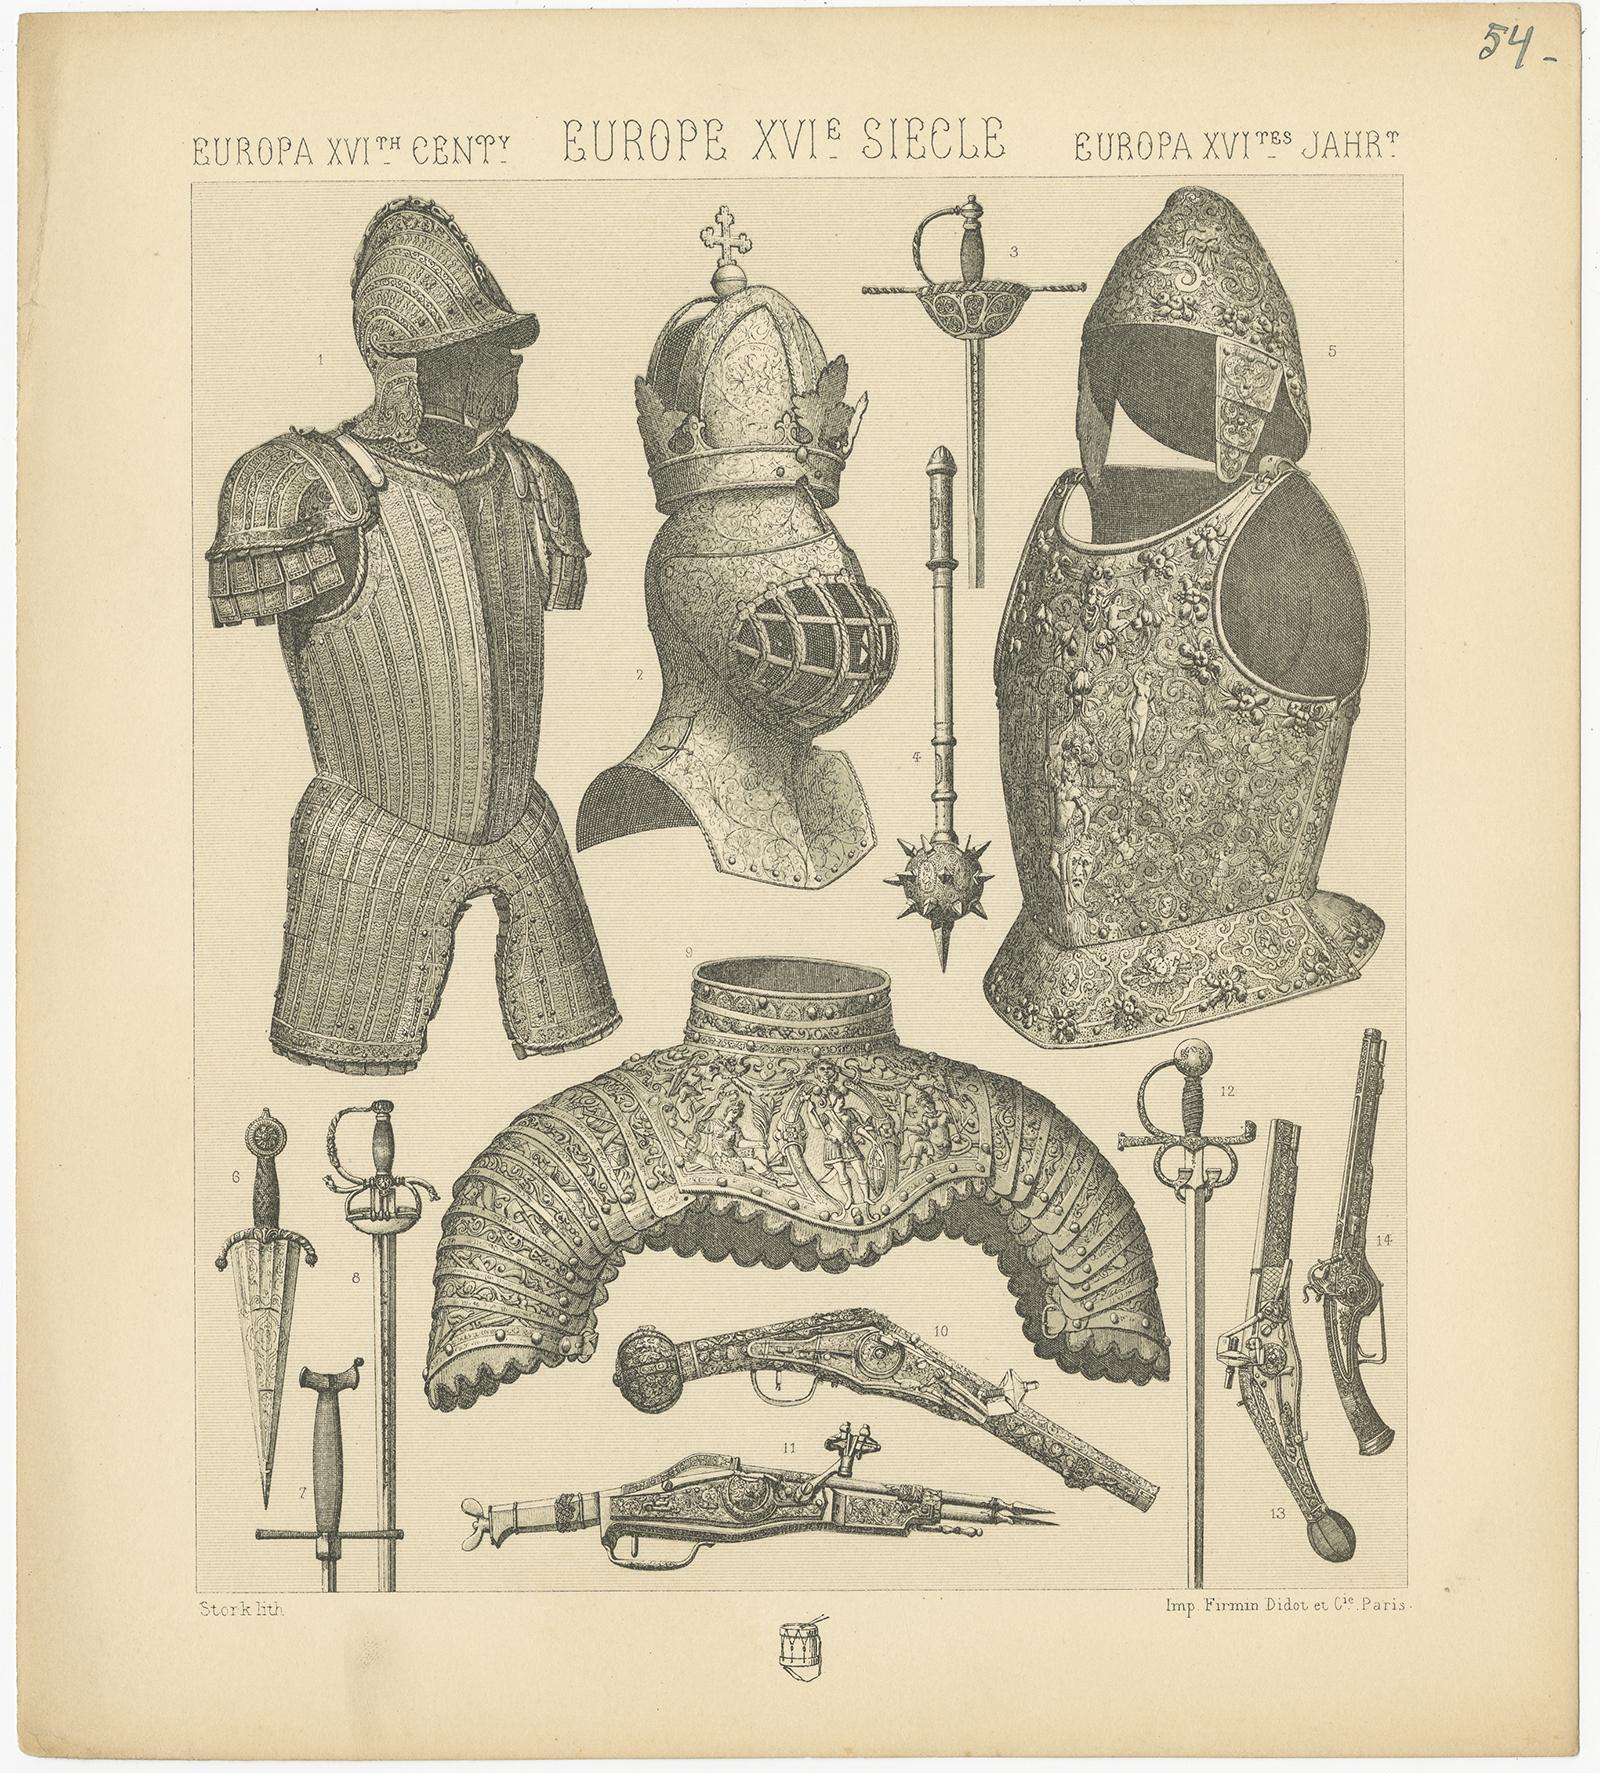 Antique print titled 'Europa XVIth Cent - Europe XVIe, Siecle - Europa XVItes Jahr'. Chromolithograph of European 16th century armaments. This print originates from 'Le Costume Historique' by M.A. Racinet. Published circa 1880.